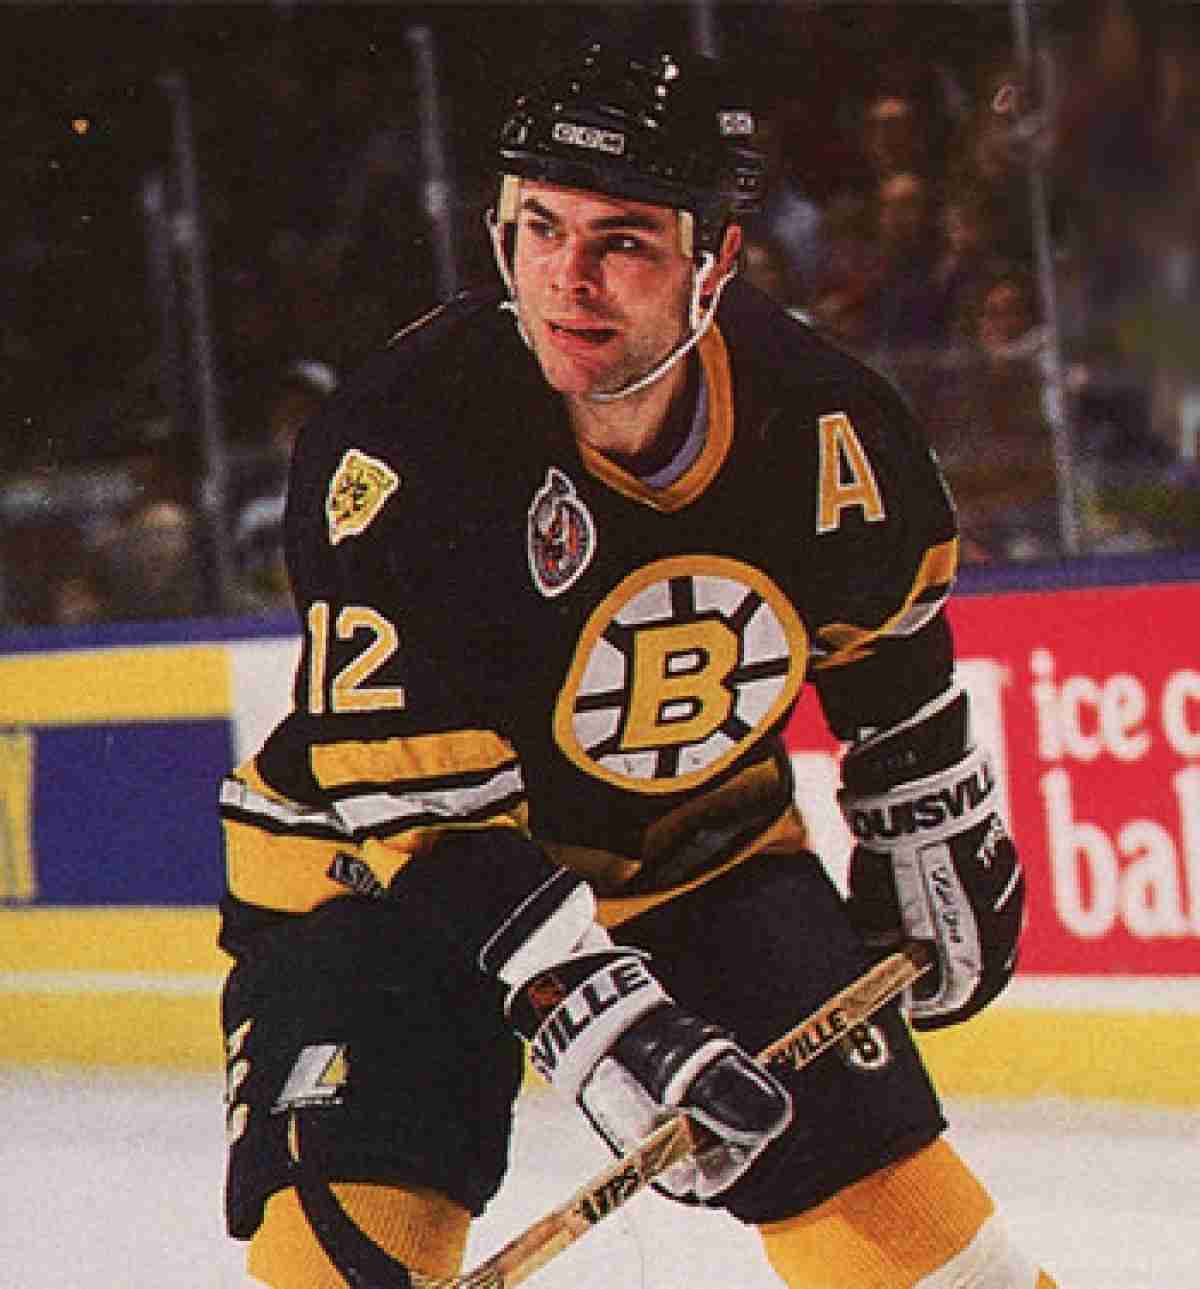 Congrats to Adam Oates for his induction into the Hockey hall of Fame.